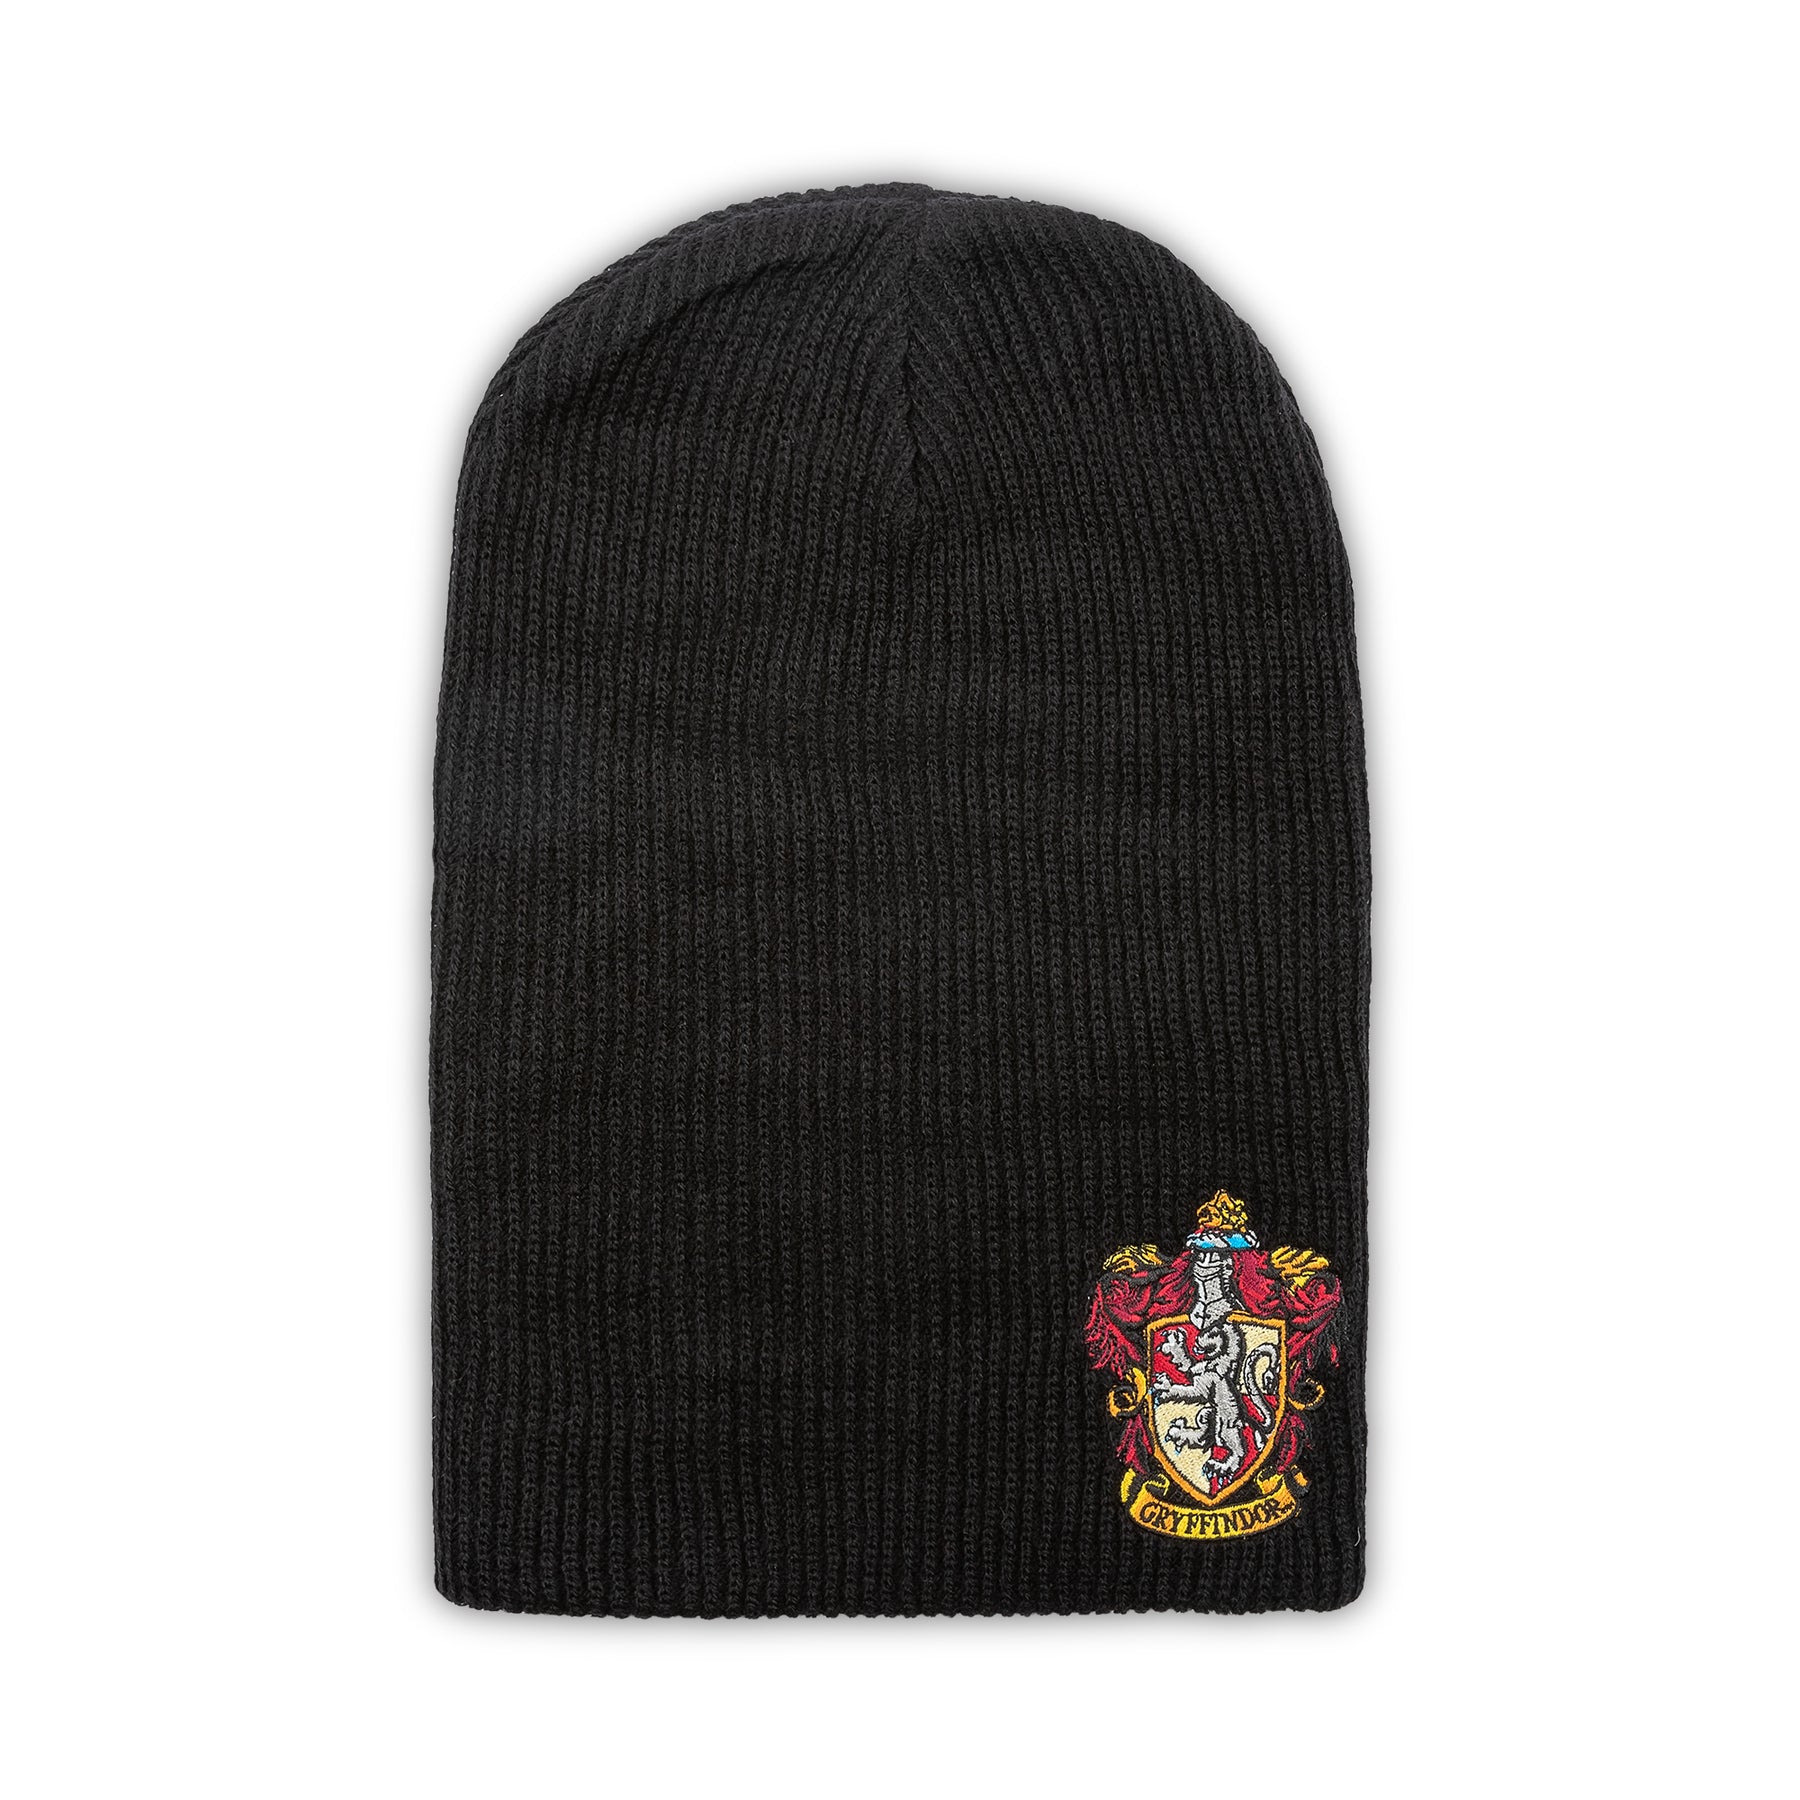 Harry Potter Gryffindor Slouch Beanie